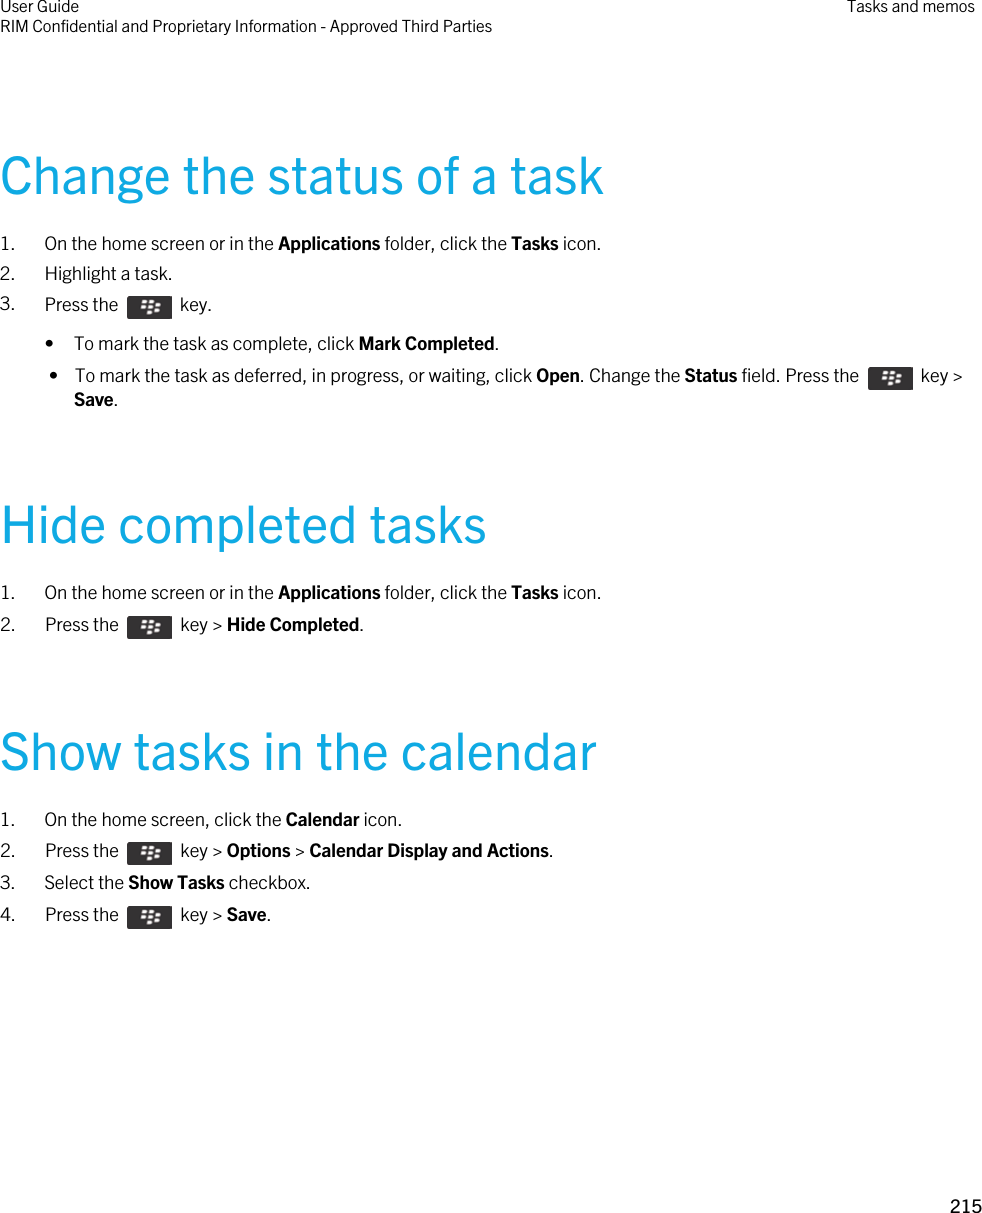 Change the status of a task1. On the home screen or in the Applications folder, click the Tasks icon.2. Highlight a task.3. Press the    key. • To mark the task as complete, click Mark Completed. •  To mark the task as deferred, in progress, or waiting, click Open. Change the Status field. Press the    key &gt; Save.Hide completed tasks1. On the home screen or in the Applications folder, click the Tasks icon.2.  Press the    key &gt; Hide Completed.Show tasks in the calendar1. On the home screen, click the Calendar icon.2.  Press the    key &gt; Options &gt; Calendar Display and Actions. 3. Select the Show Tasks checkbox.4.  Press the    key &gt; Save. User GuideRIM Confidential and Proprietary Information - Approved Third Parties Tasks and memos215 